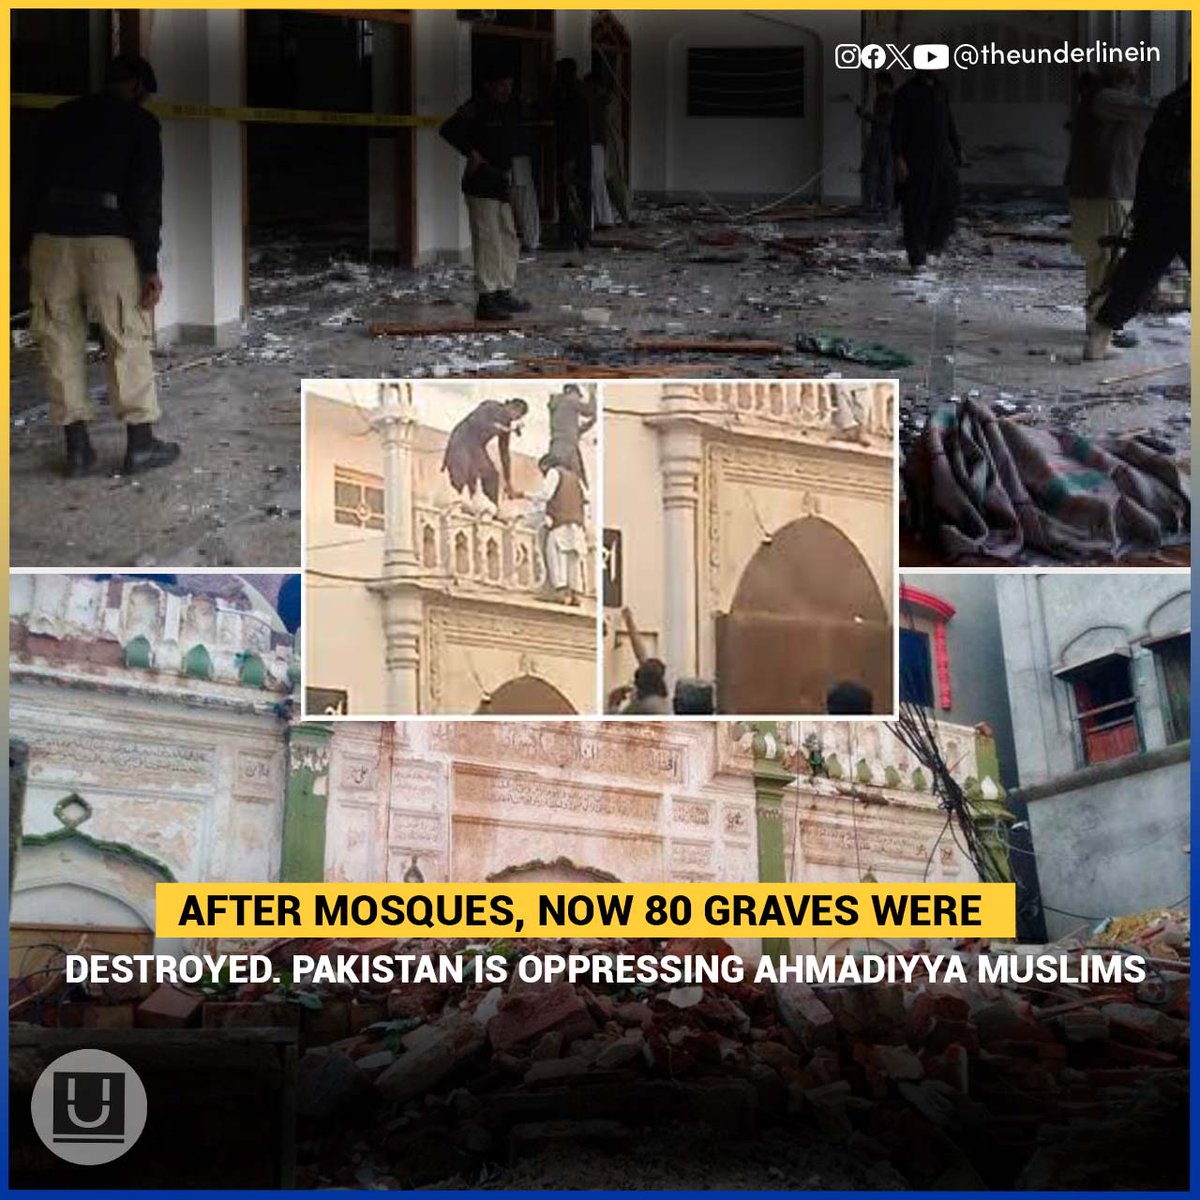 #BREAKINGNEWS : After mosques, now 80 graves were destroyed. Pakistan is oppressing Ahmadiyya Muslims.

#Pakistan #PakistanExposes #ahmadiyya #ahmadiyyaMuslims #Pakistani #jamaateAhmadiya #Punjab  

Mosques of Ahmadiyya Community: 80 graves of Ahmadiyya Community have been…